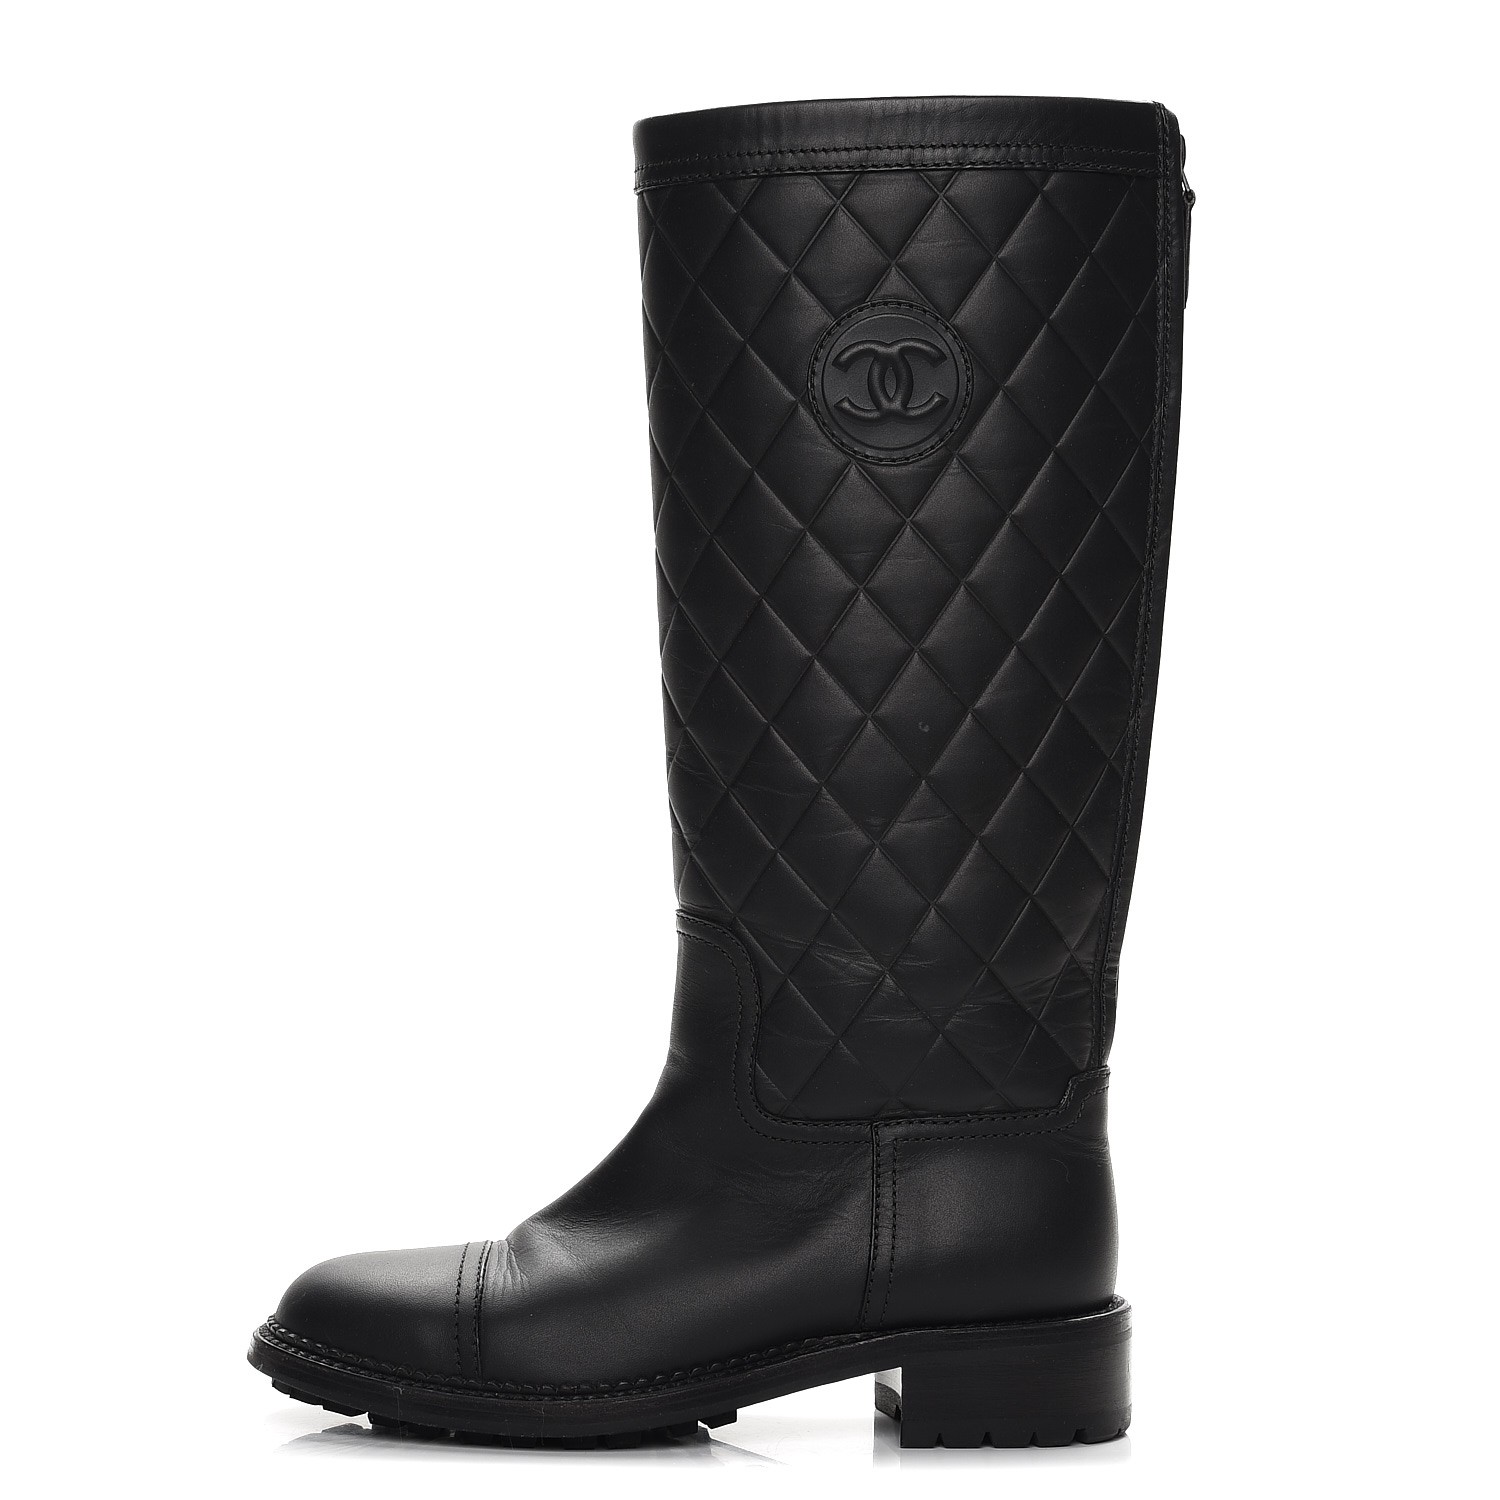 CHANEL Calfskin Quilted Riding Boots 35.5 Black 221148